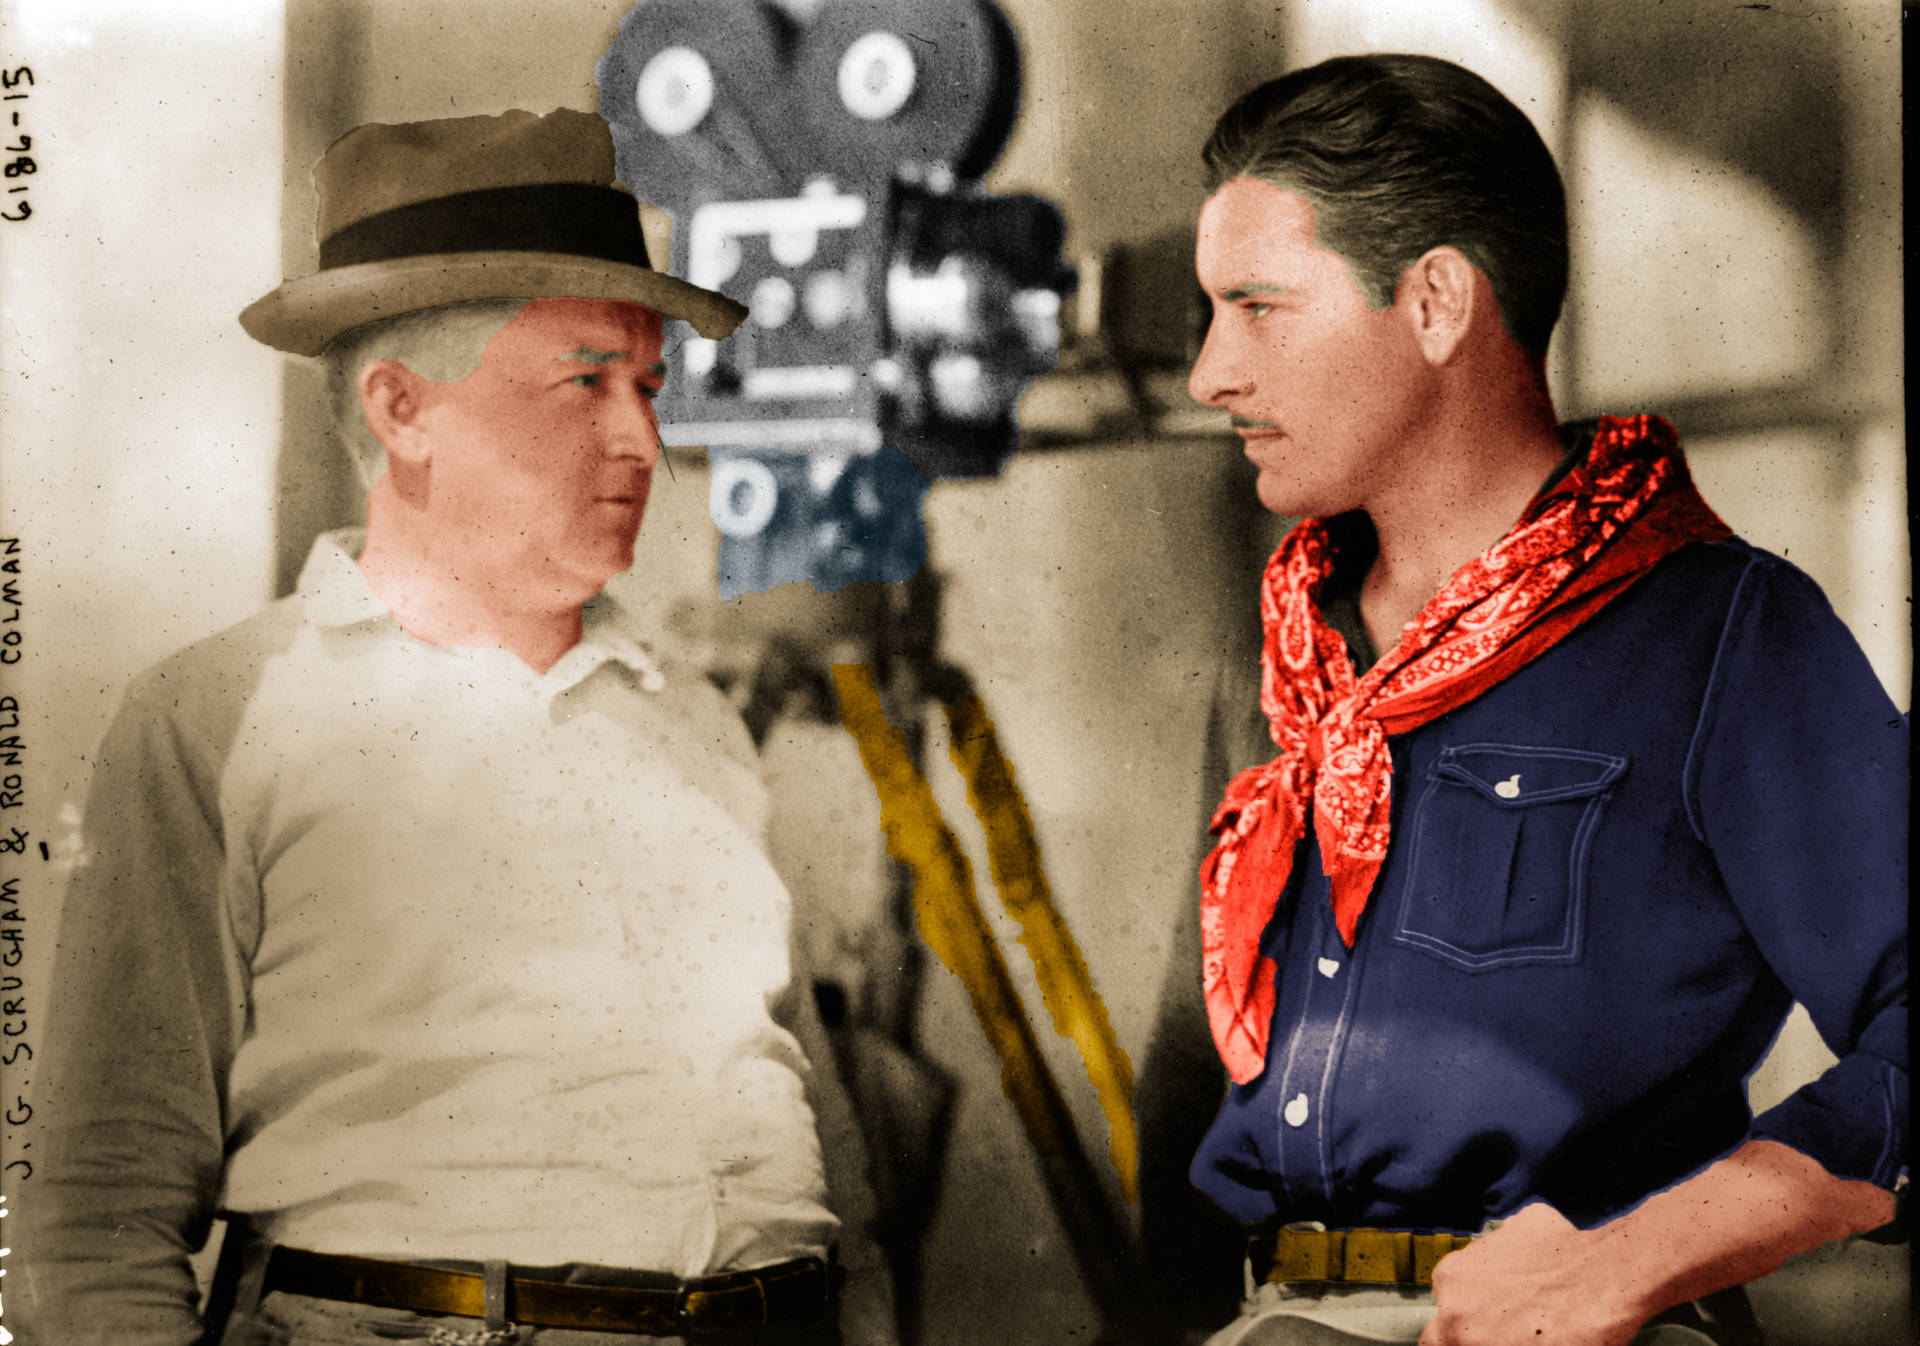 "Legendary actor Ronald Colman collaborating with a film director on a movie set" Wallpaper